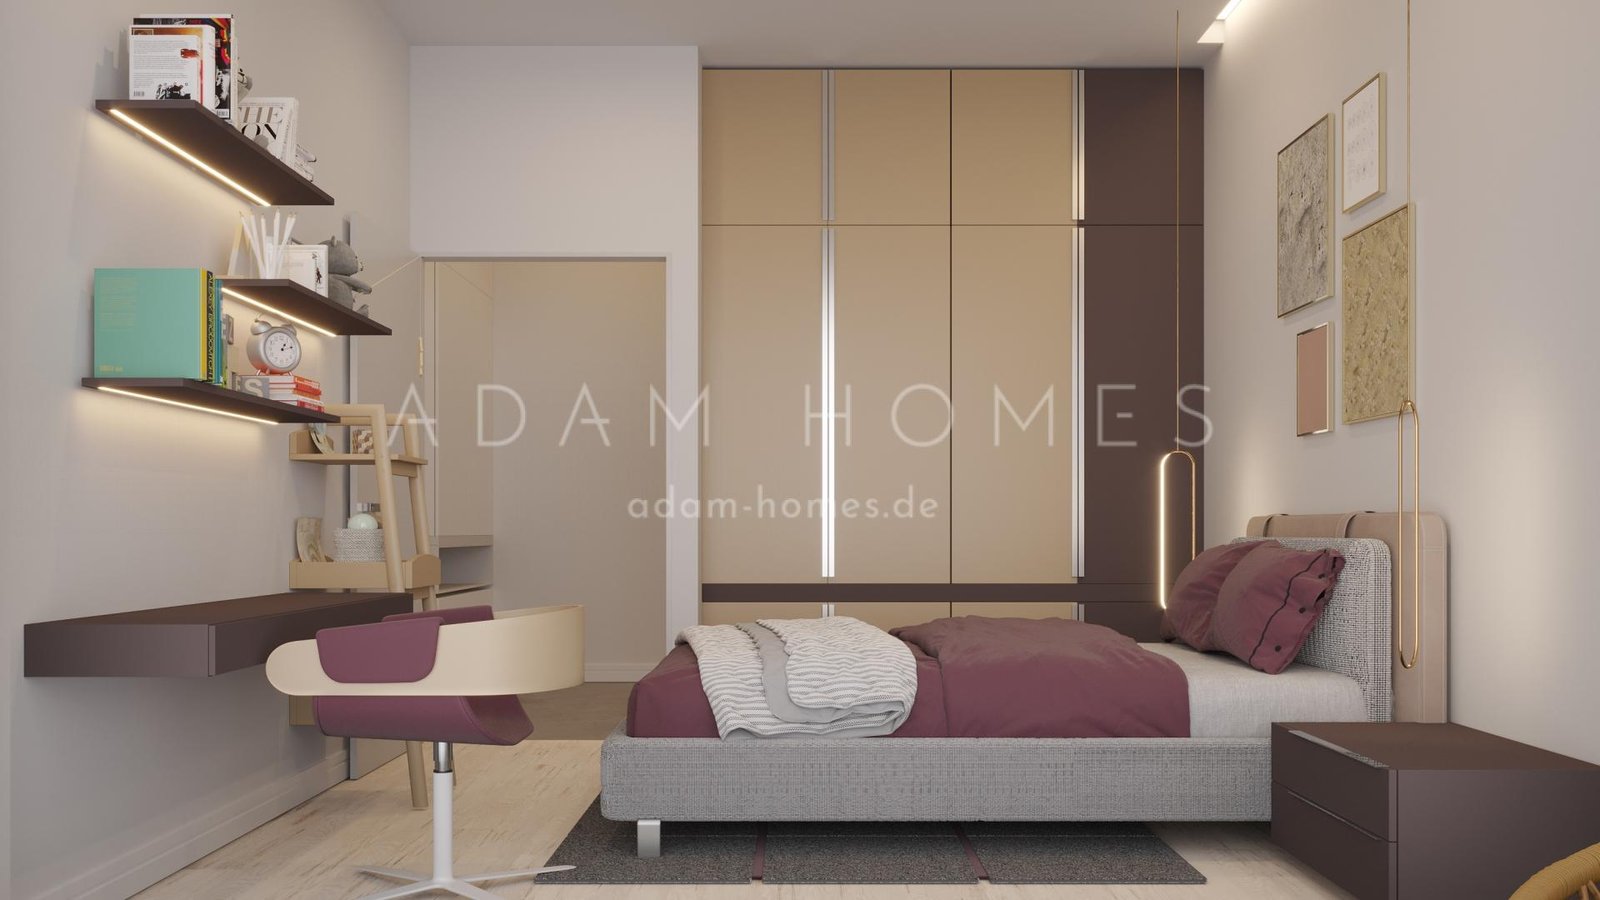 3 bedrooms apartment in an excellent luxury project